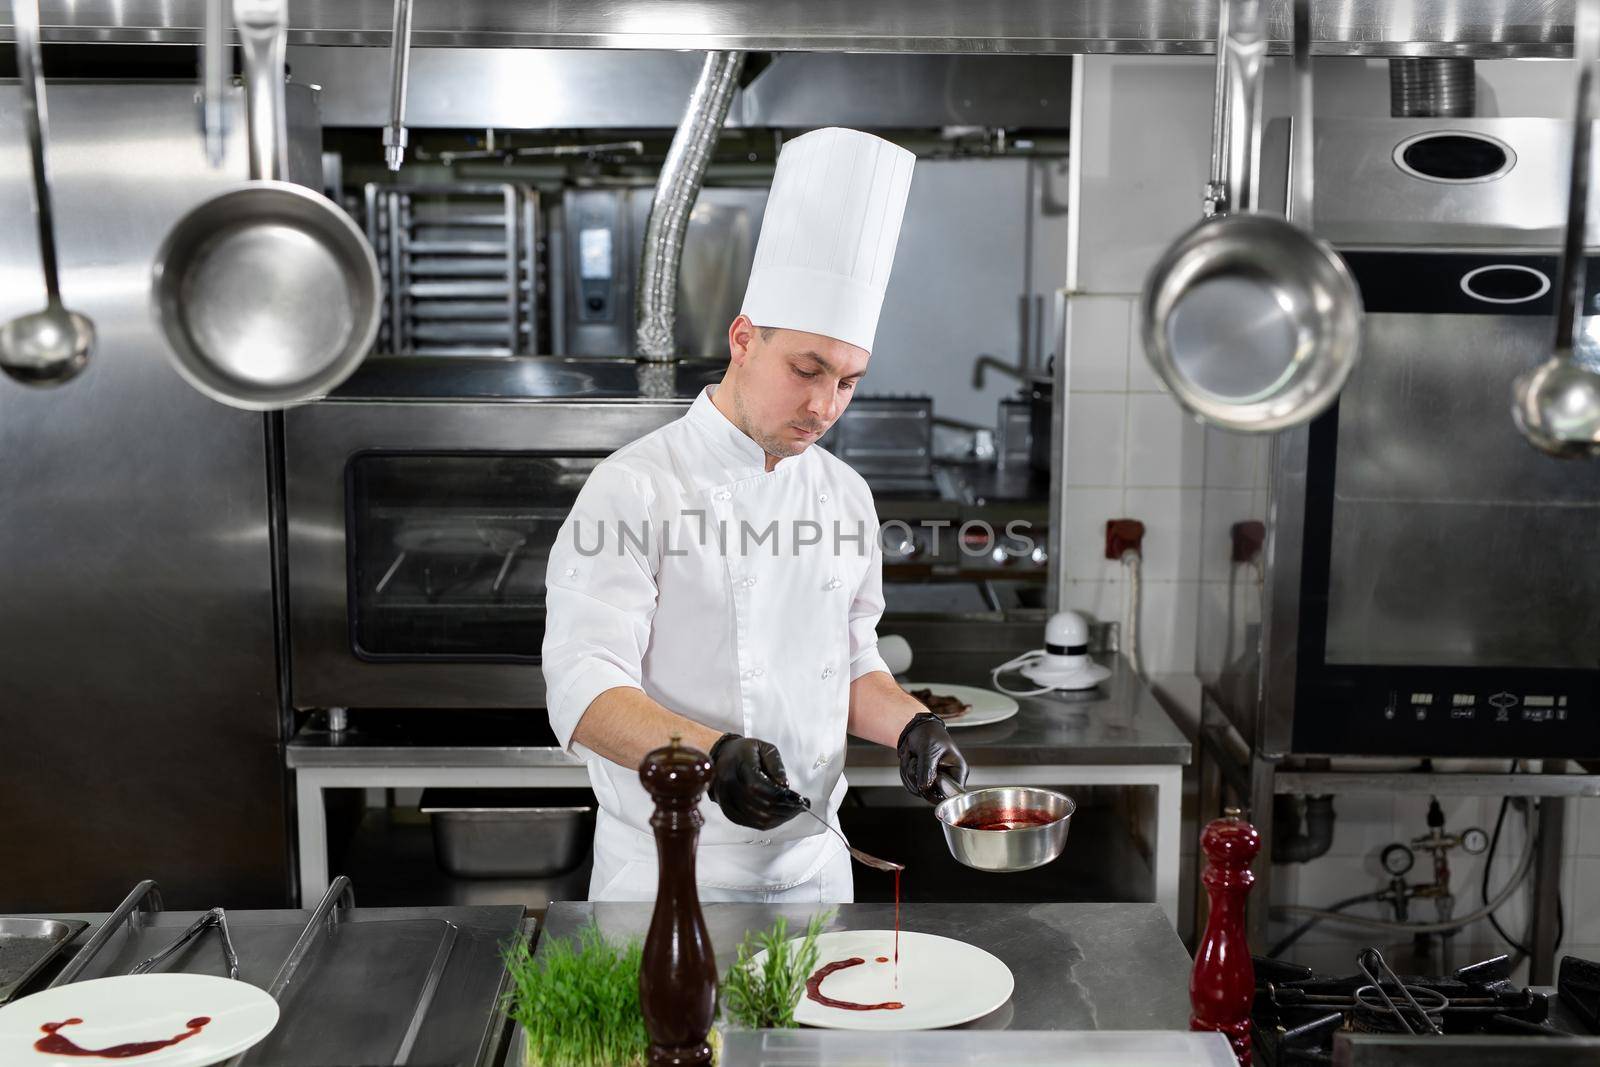 Chef pours red strawberry sauce into a plate